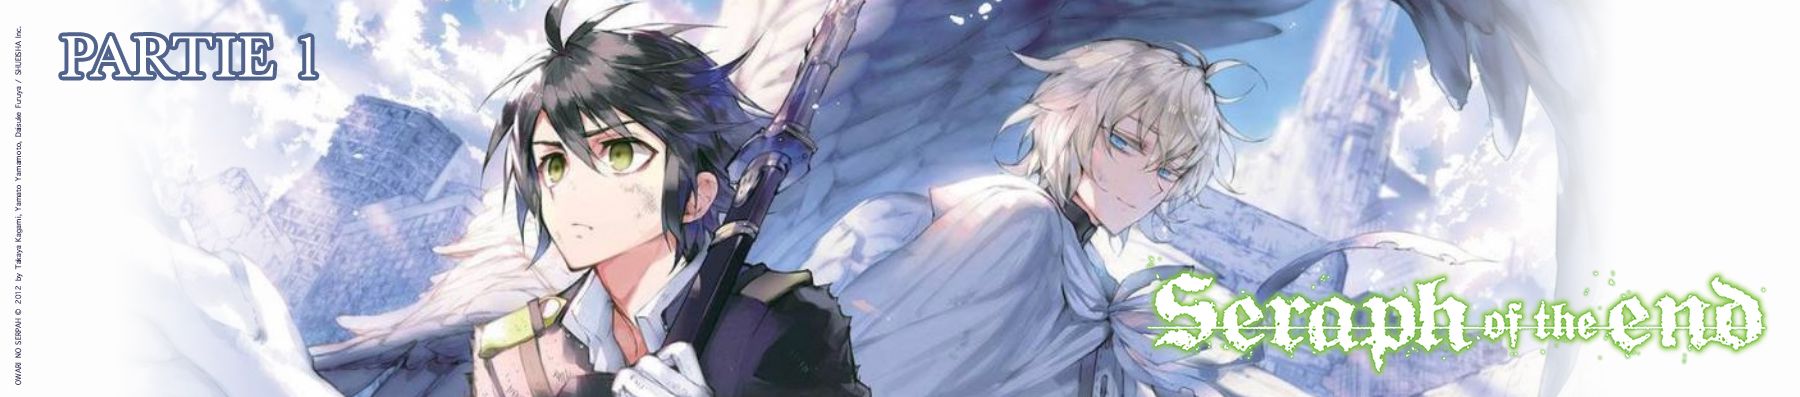 Dossier - Seraph of the End - Partie 1